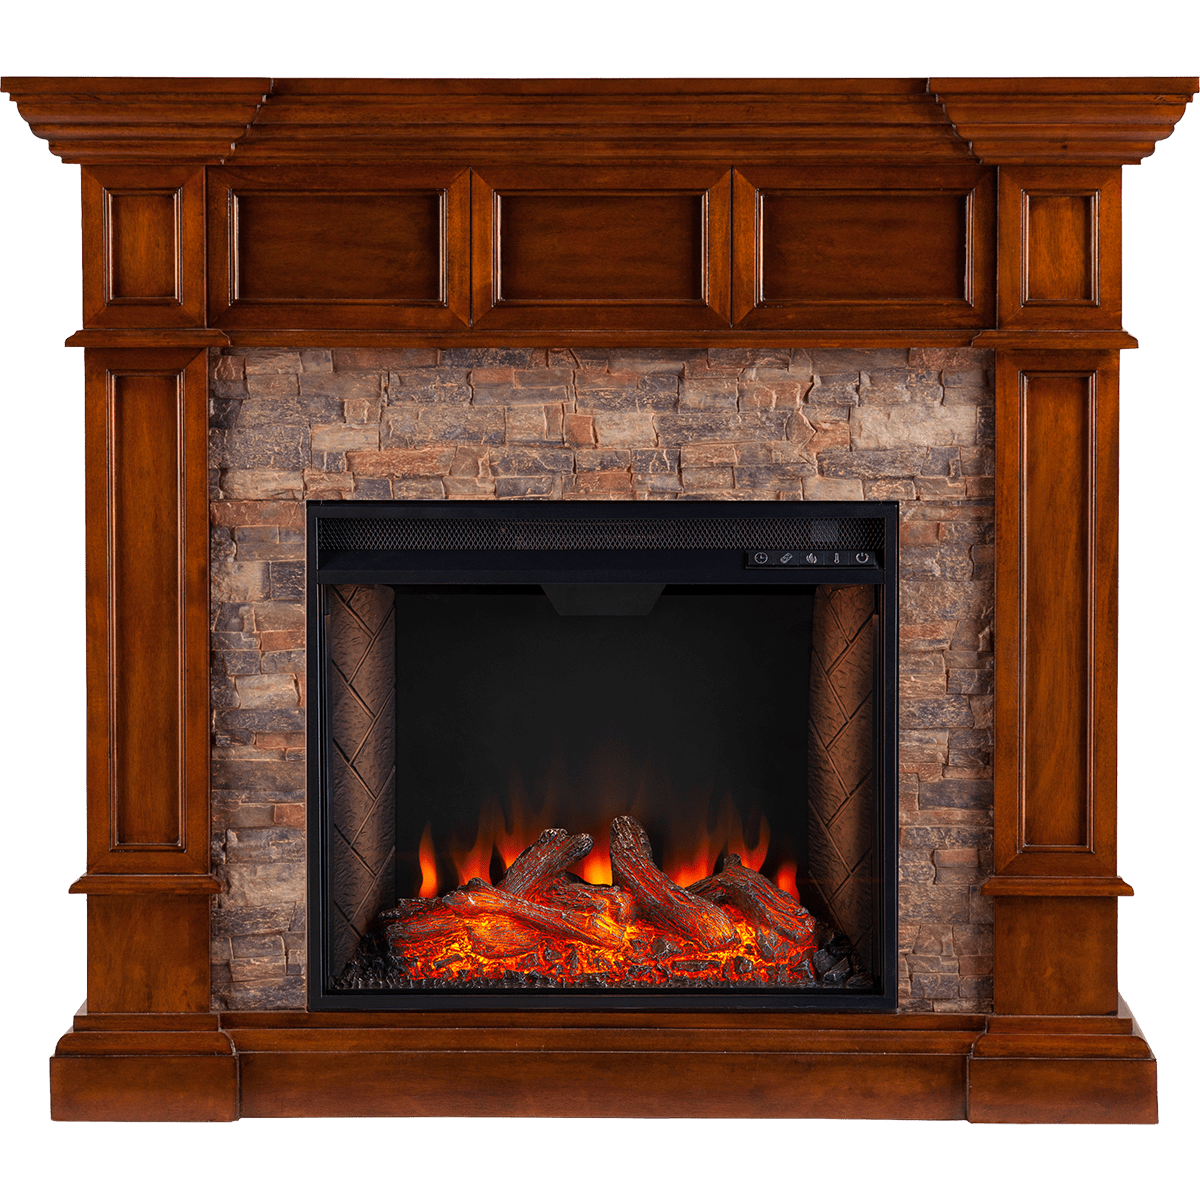 Indoor Electric Fireplace Heater Fresh southern Enterprises Merrimack Simulated Stone Convertible Electric Fireplace